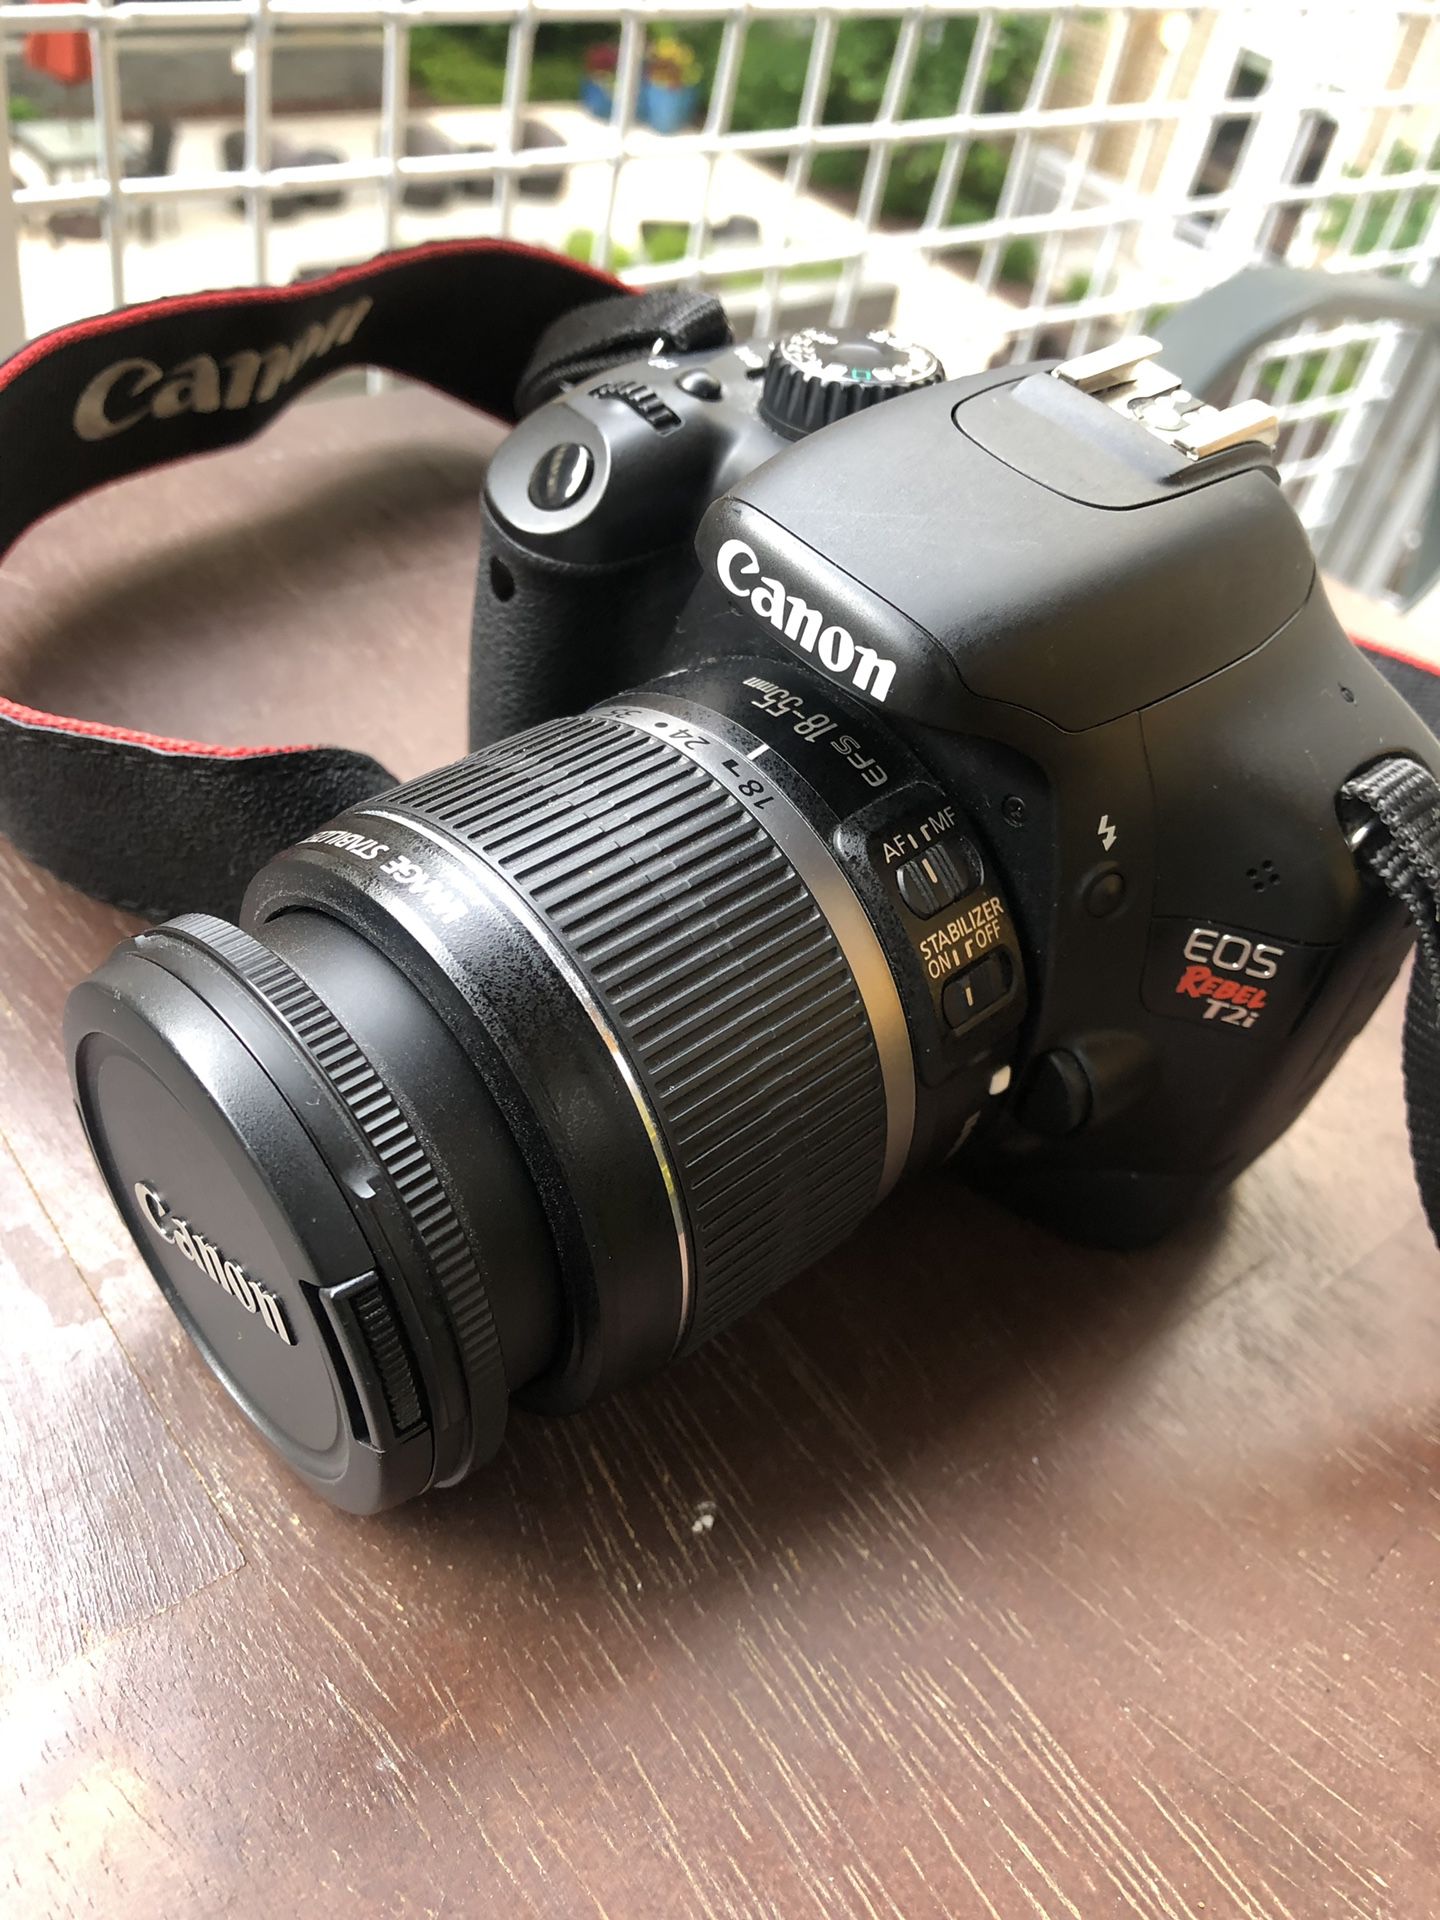 Like New 18 MP Canon Camera rebel T2i with Lens and Flash